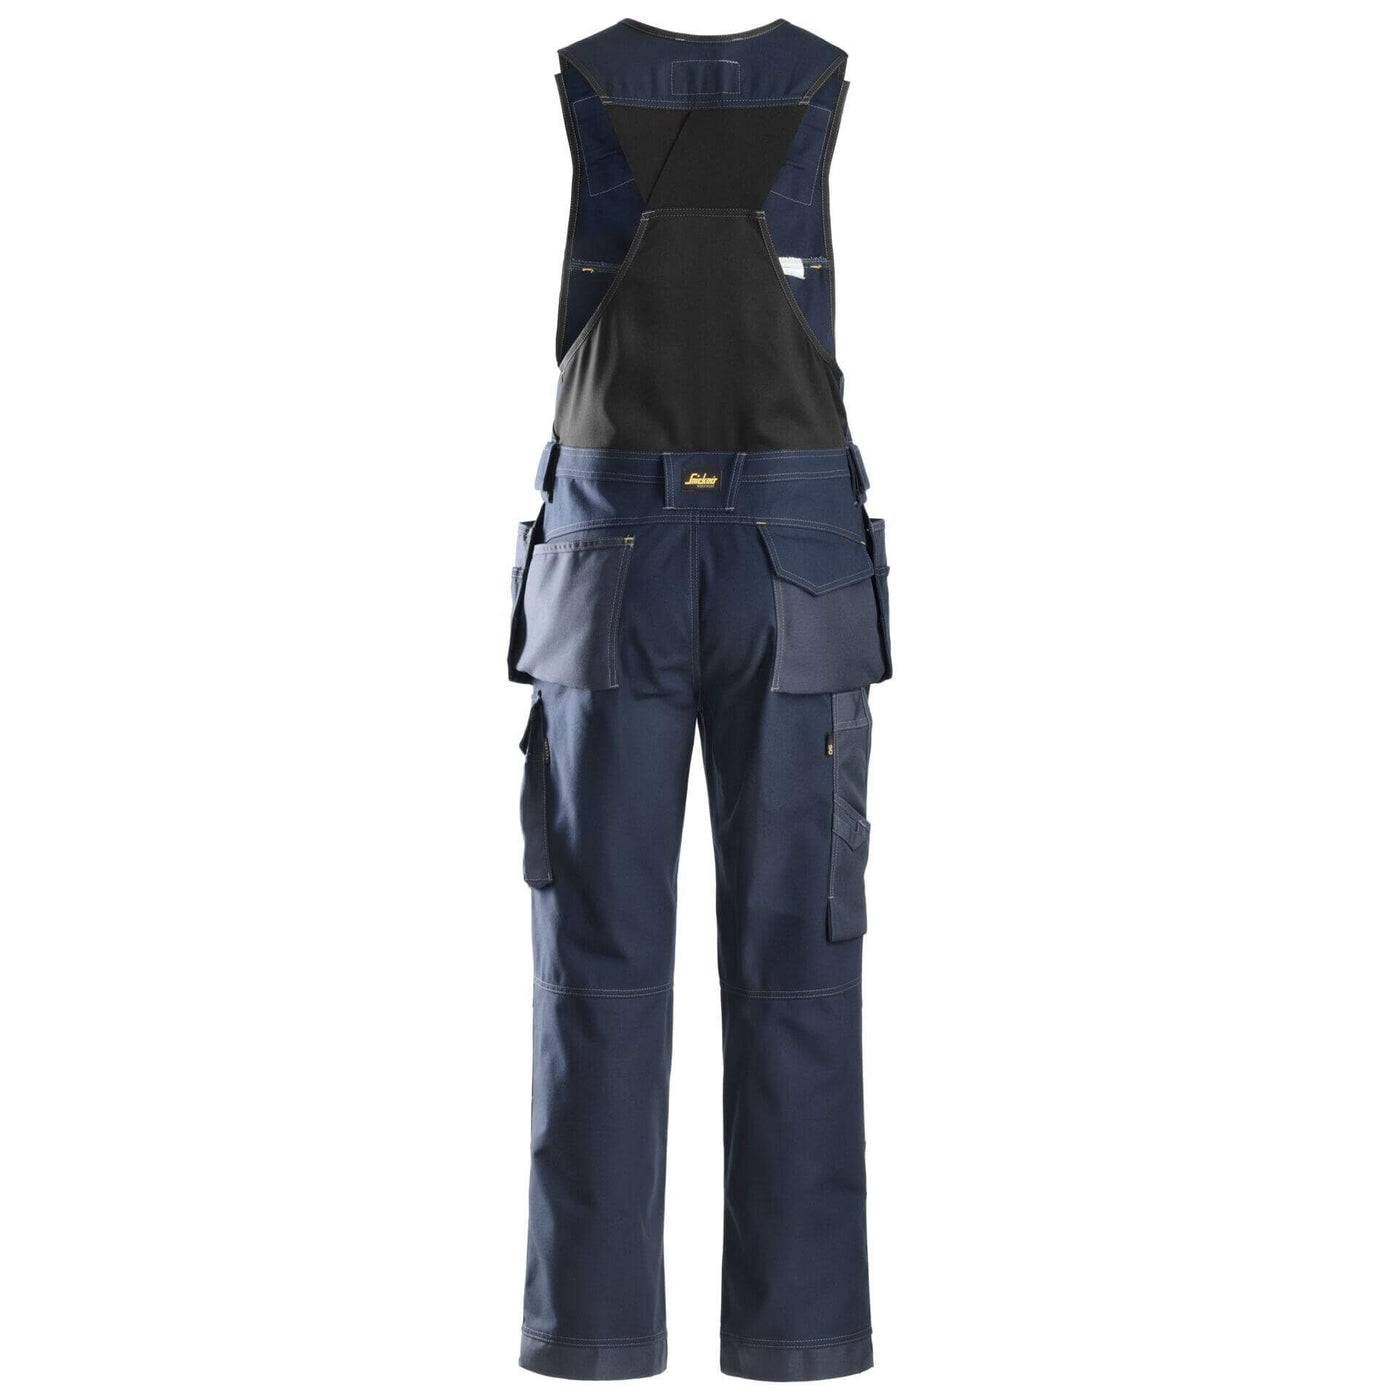 Snickers 0214 Craftsmen One piece Trousers Holster Pockets Canvas+ Navy Navy back #colour_navy-navy